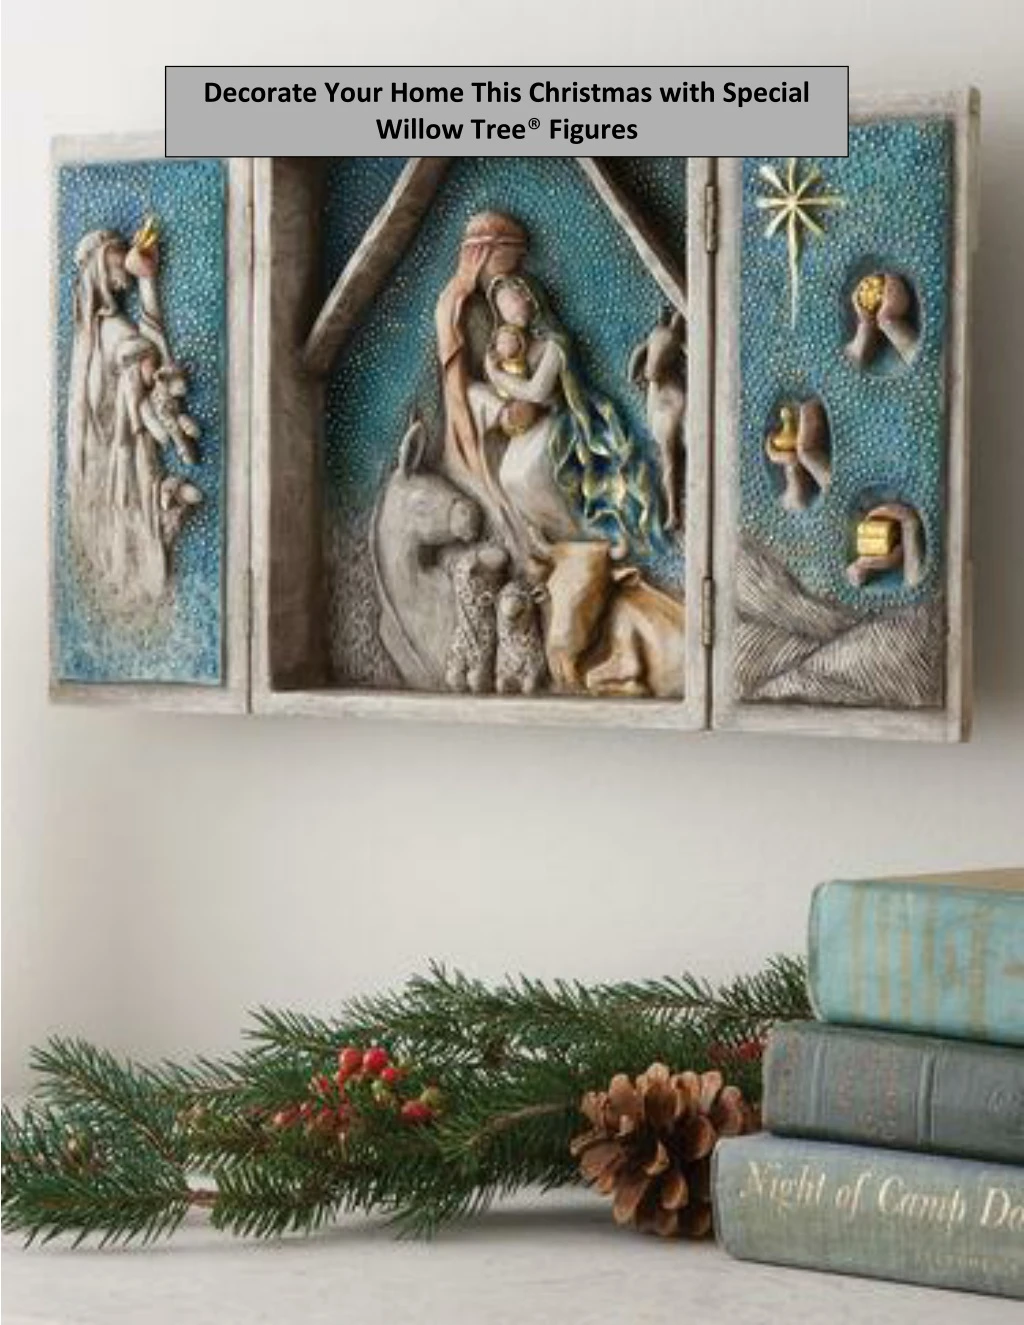 decorate your home this christmas with special